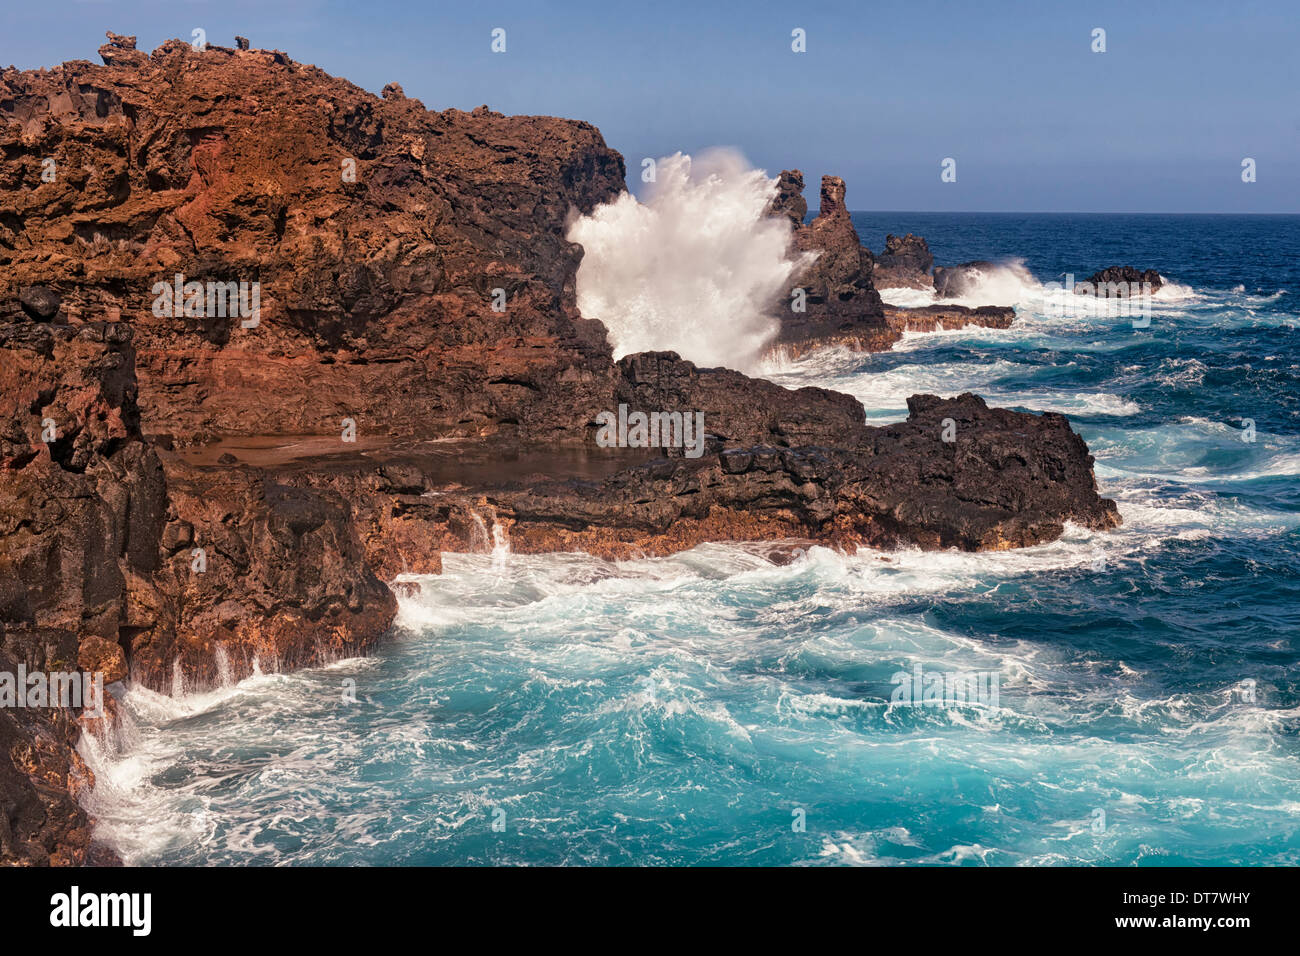 The Pacific Ocean crashes against the lava shoreline at Nakalele Point on Hawaii’s island of Maui. Stock Photo